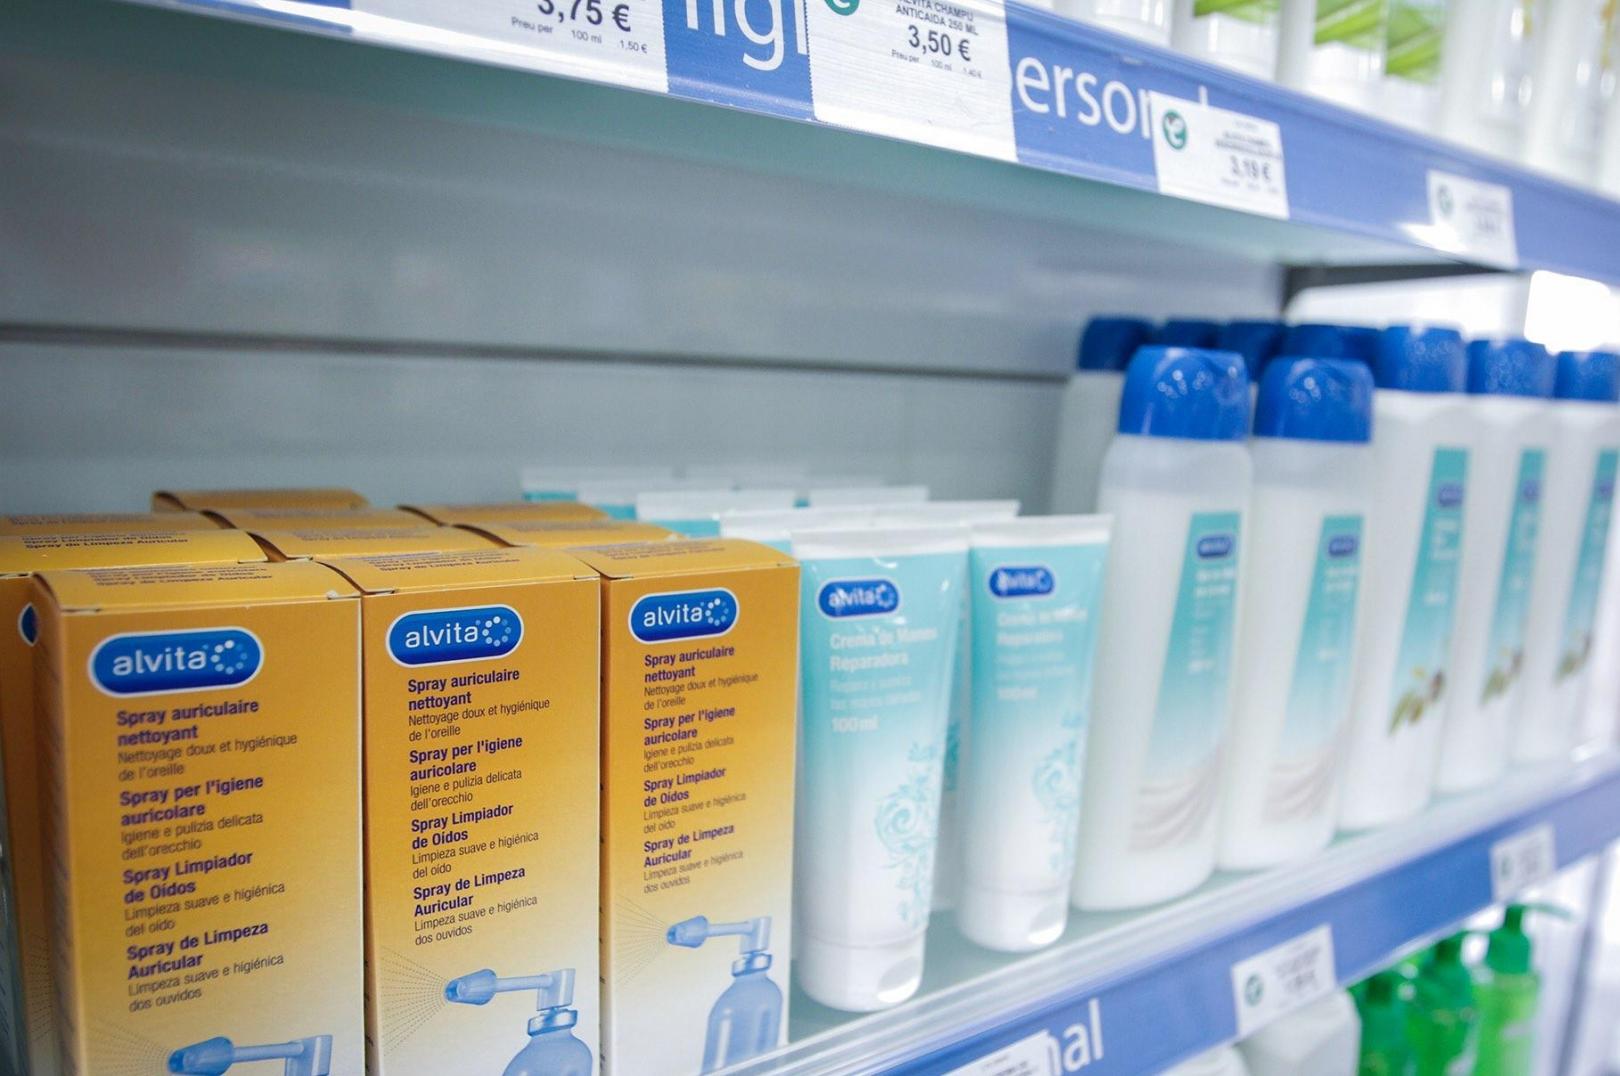 Alvita range of patient care products on a shelf